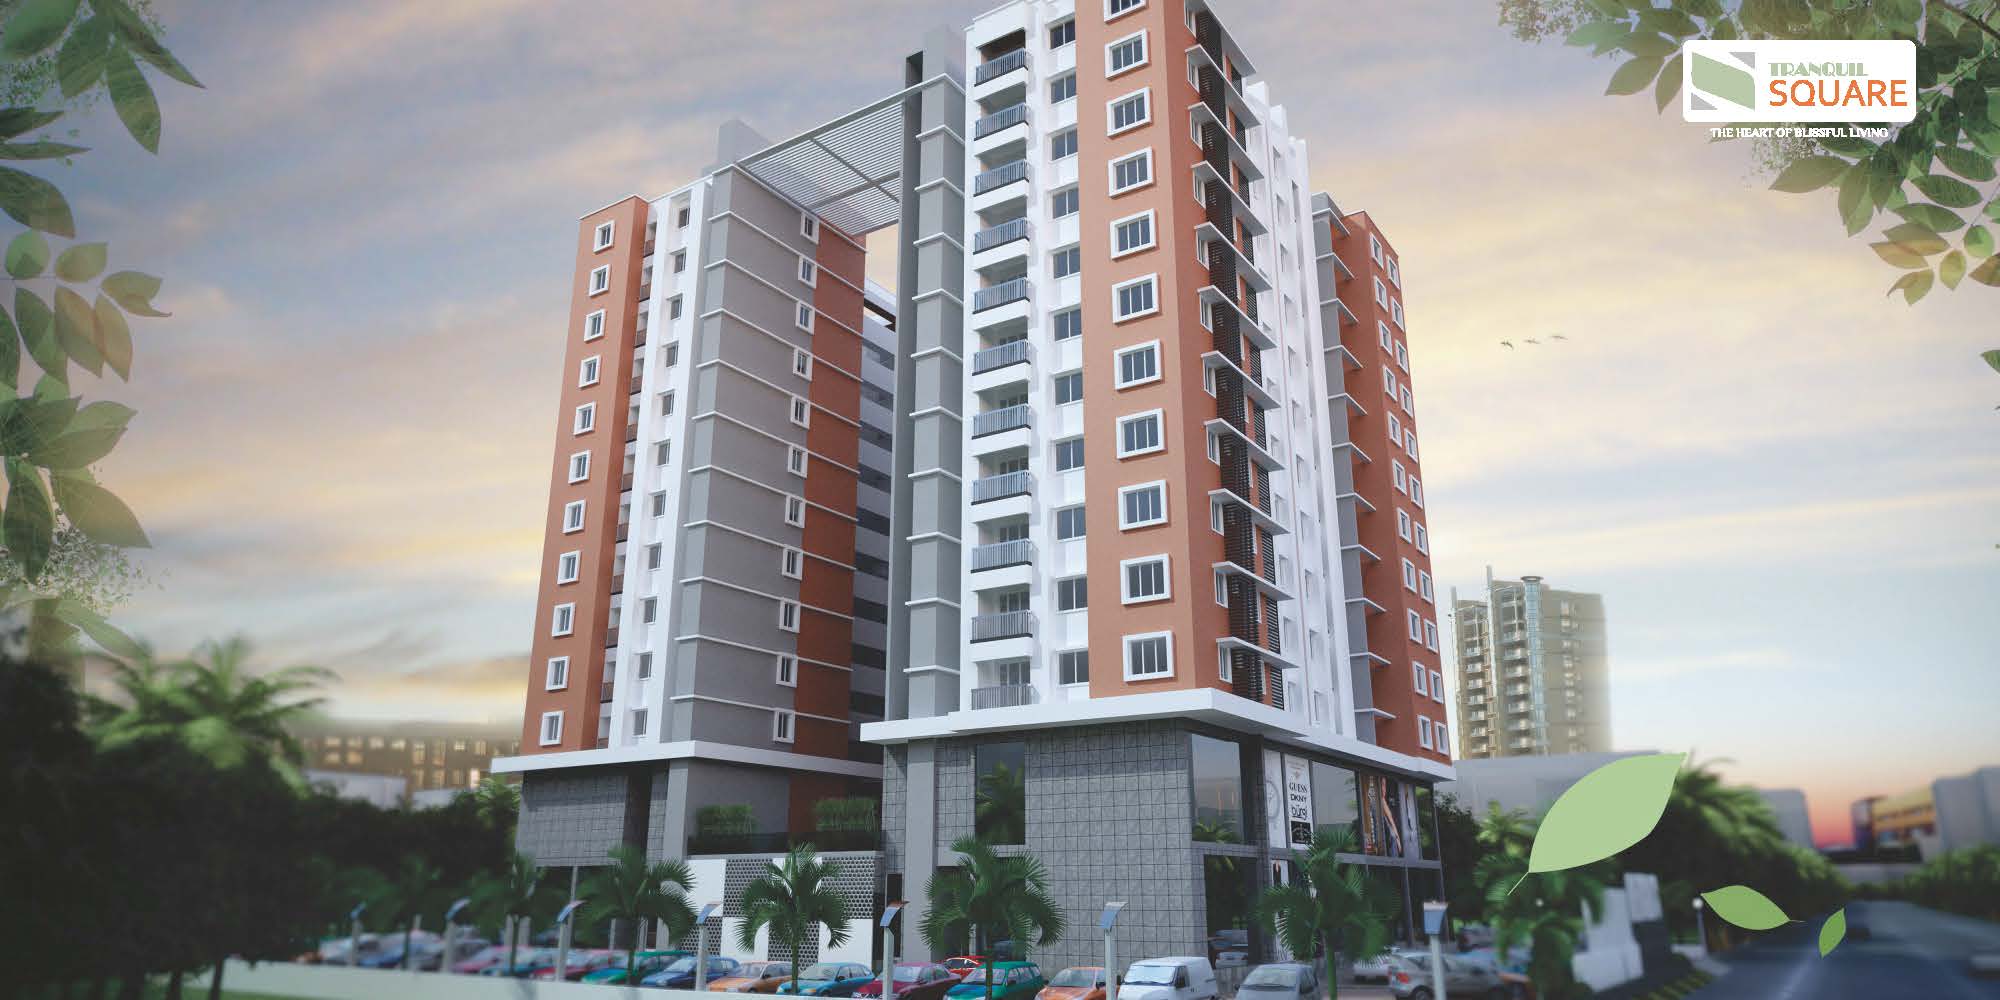 Tranquil living in an all new different perspective at Plaza Tranquil Square Update